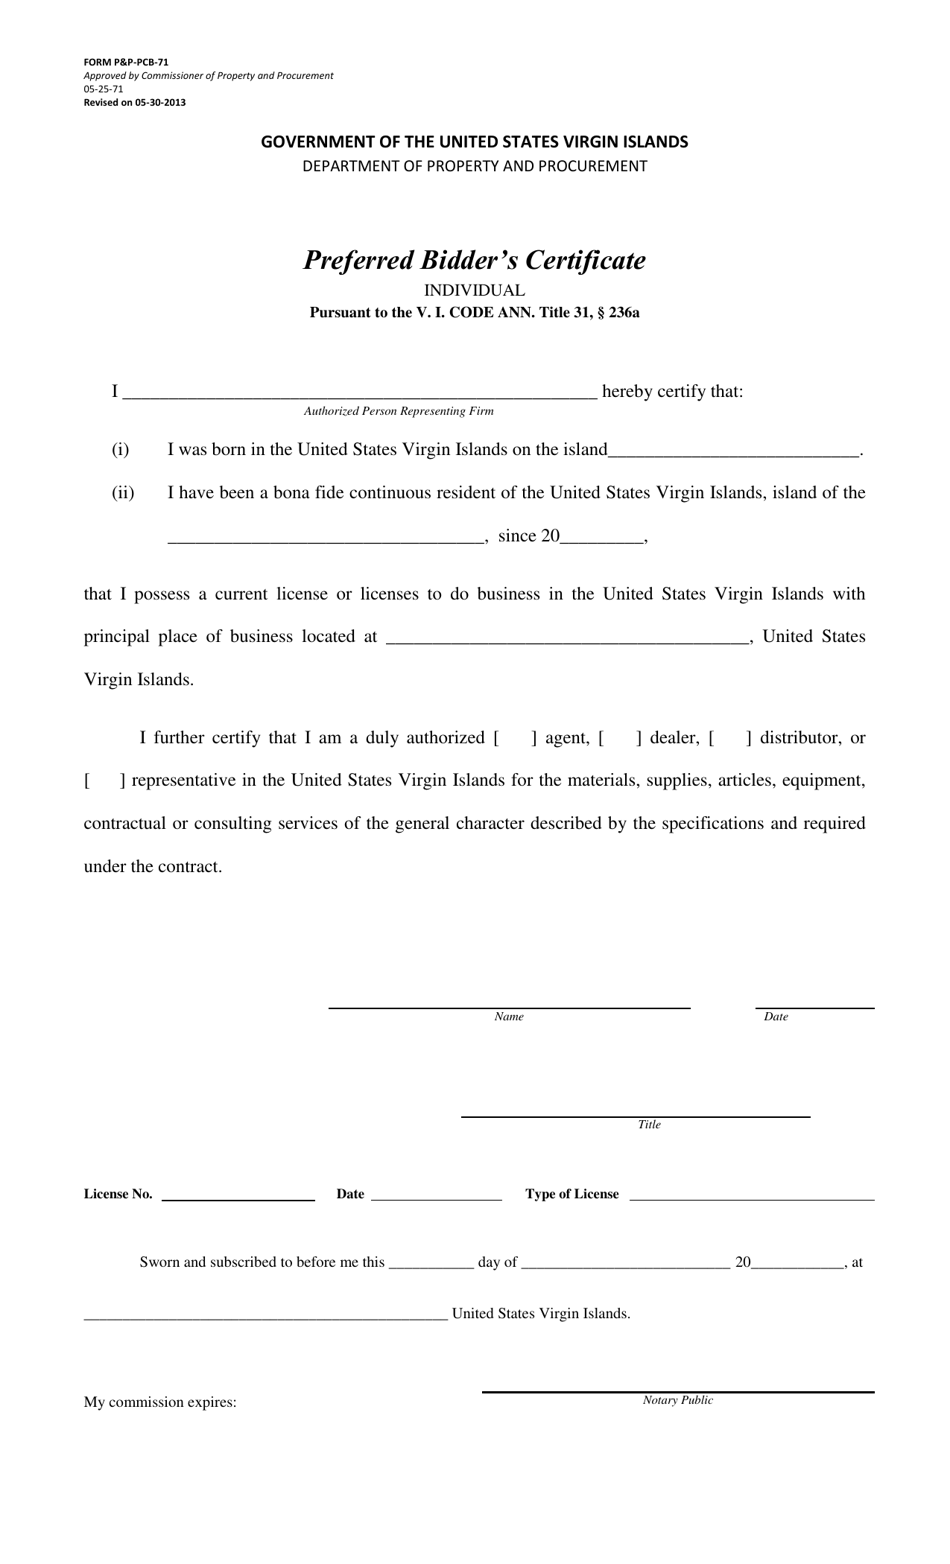 Form PP-PCB-71 Preferred Bidders Certificate for Individuals - Virgin Islands, Page 1